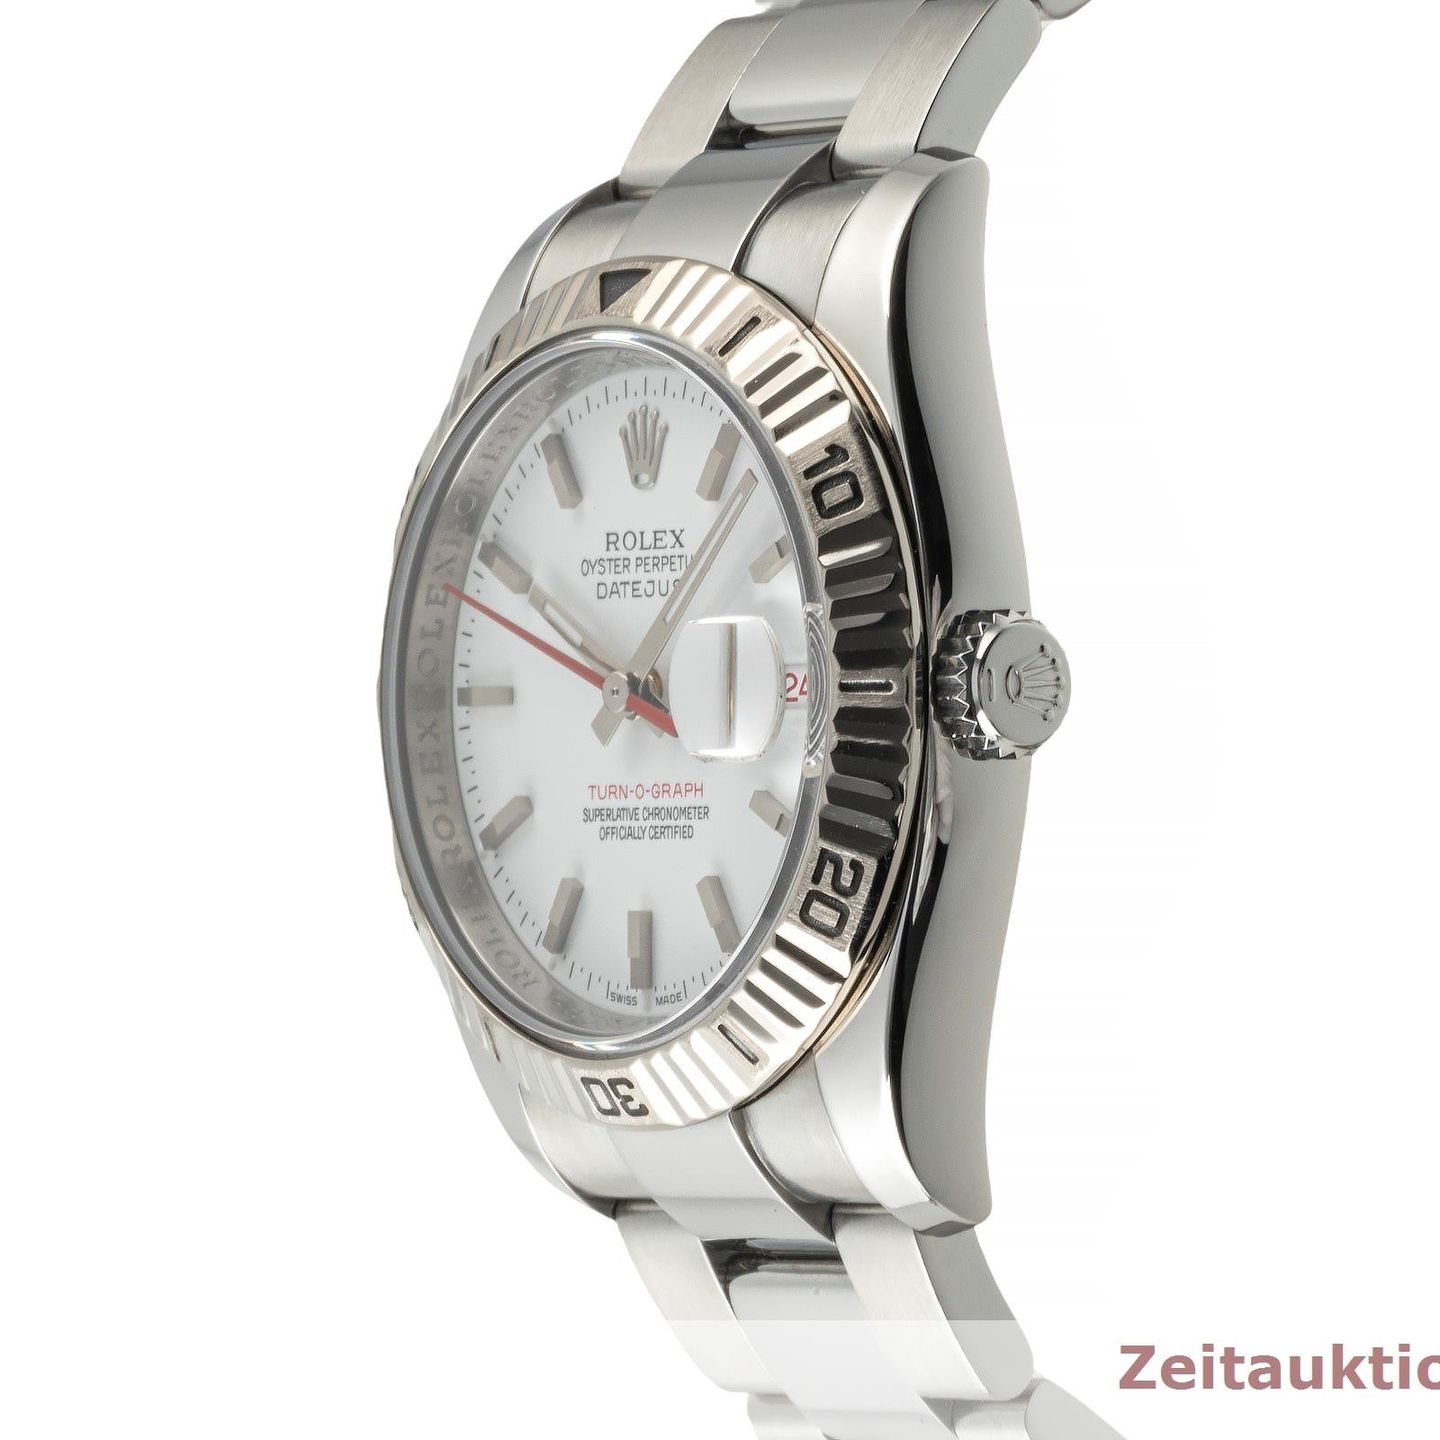 Rolex Datejust Turn-O-Graph 116264 (2012) - White dial 36 mm Steel case (6/8)